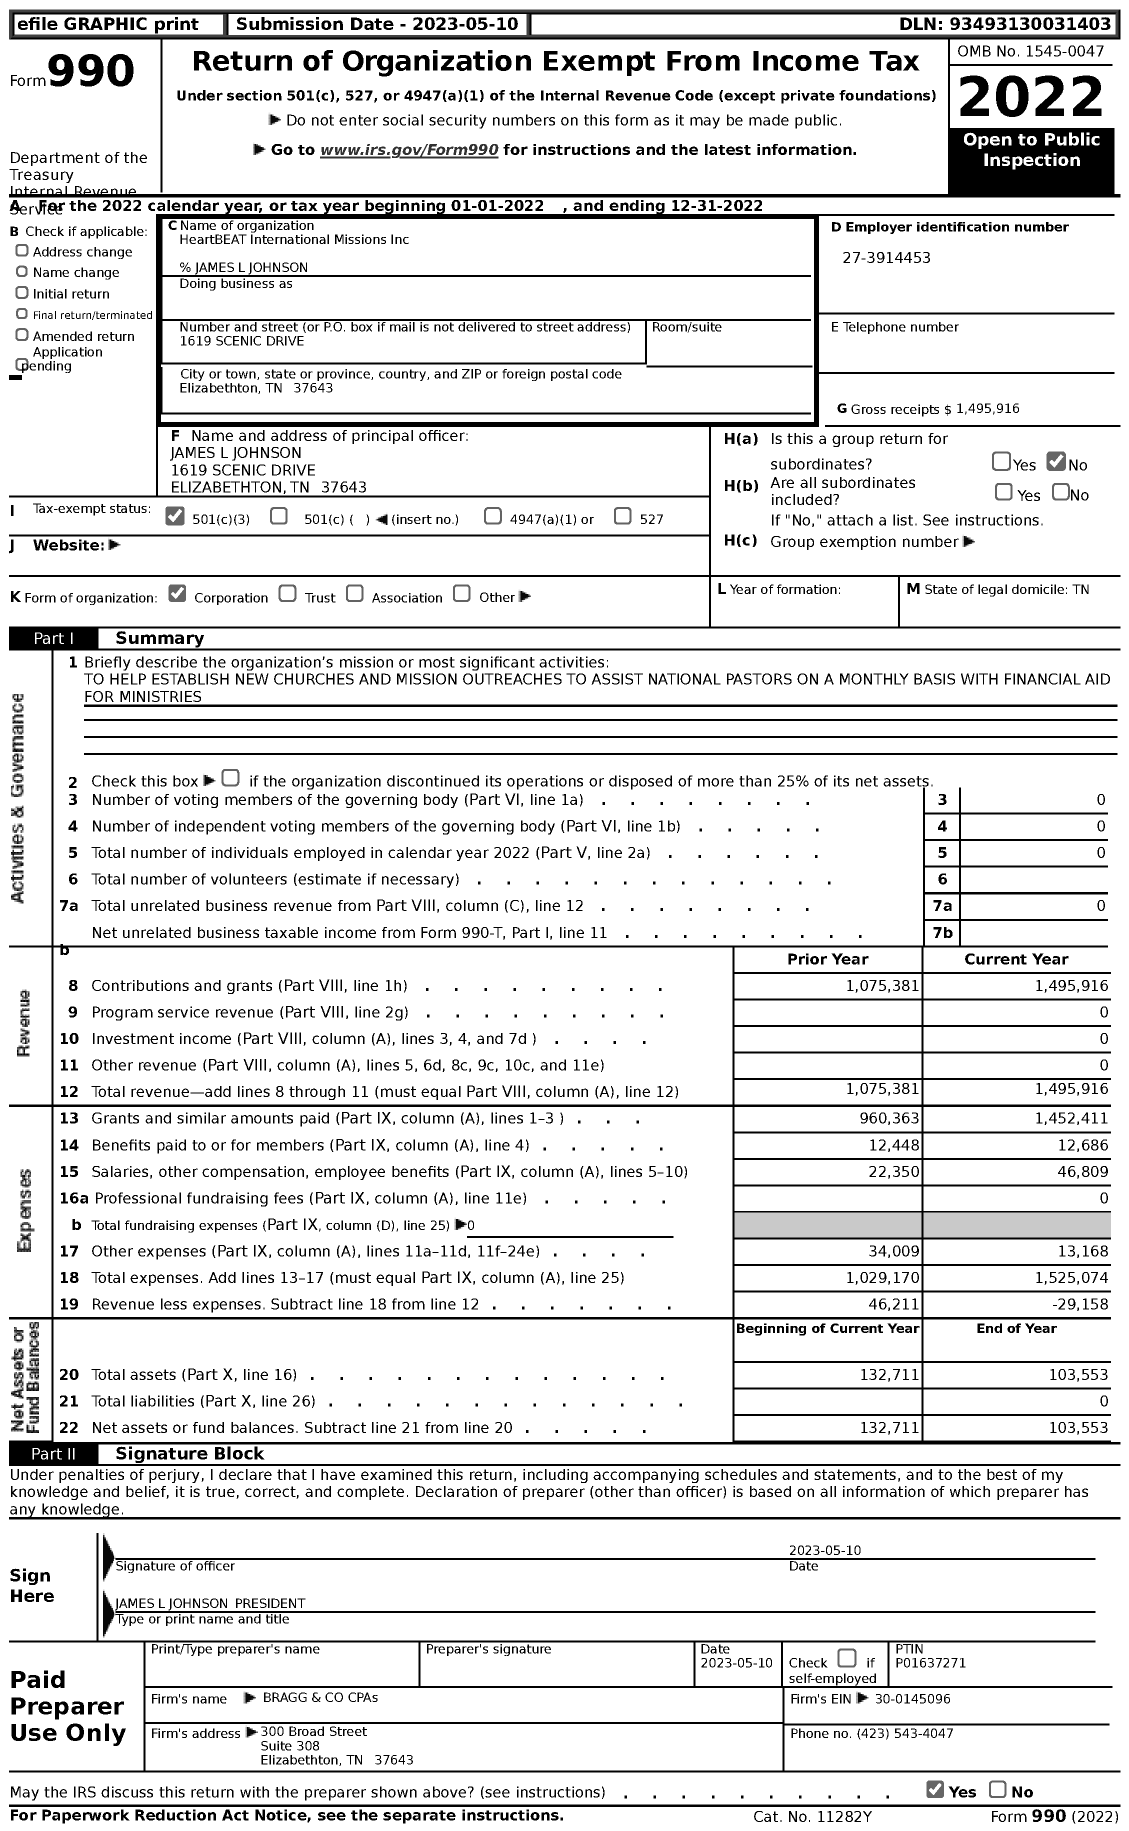 Image of first page of 2022 Form 990 for HeartBEAT International Missions